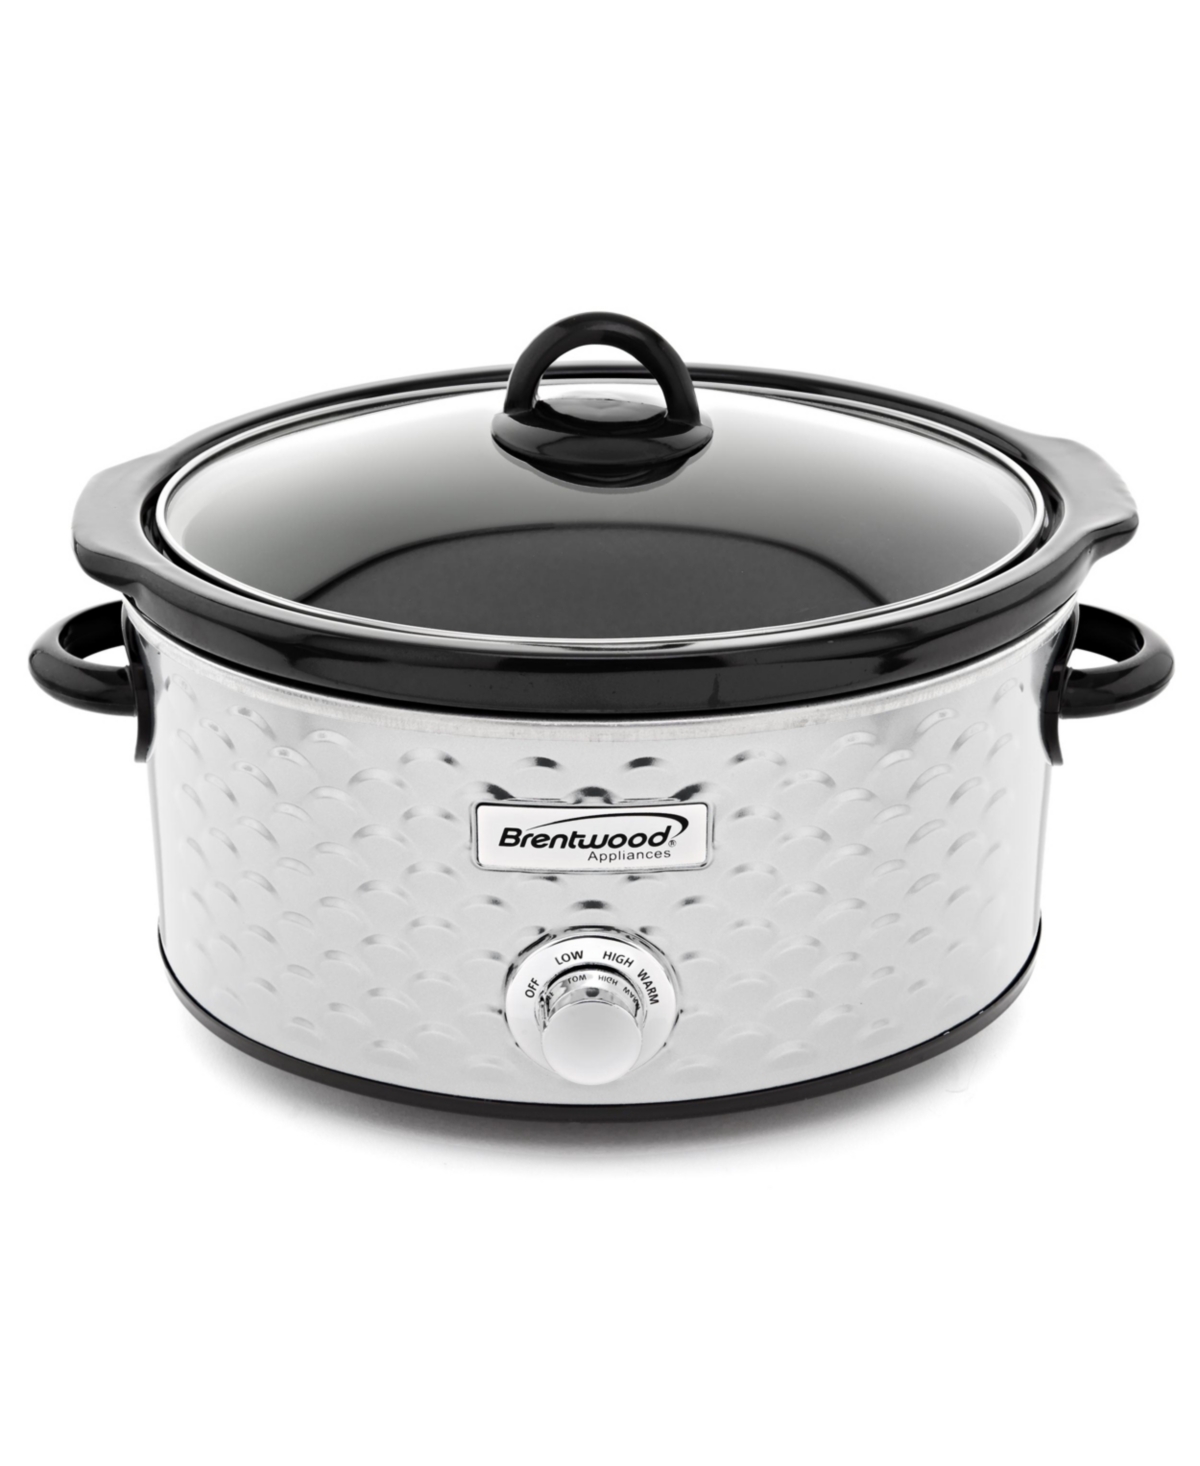 Brentwood 3 Cup Uncooked/6 Cup Cooked Non Stick Rice Cooker in Black